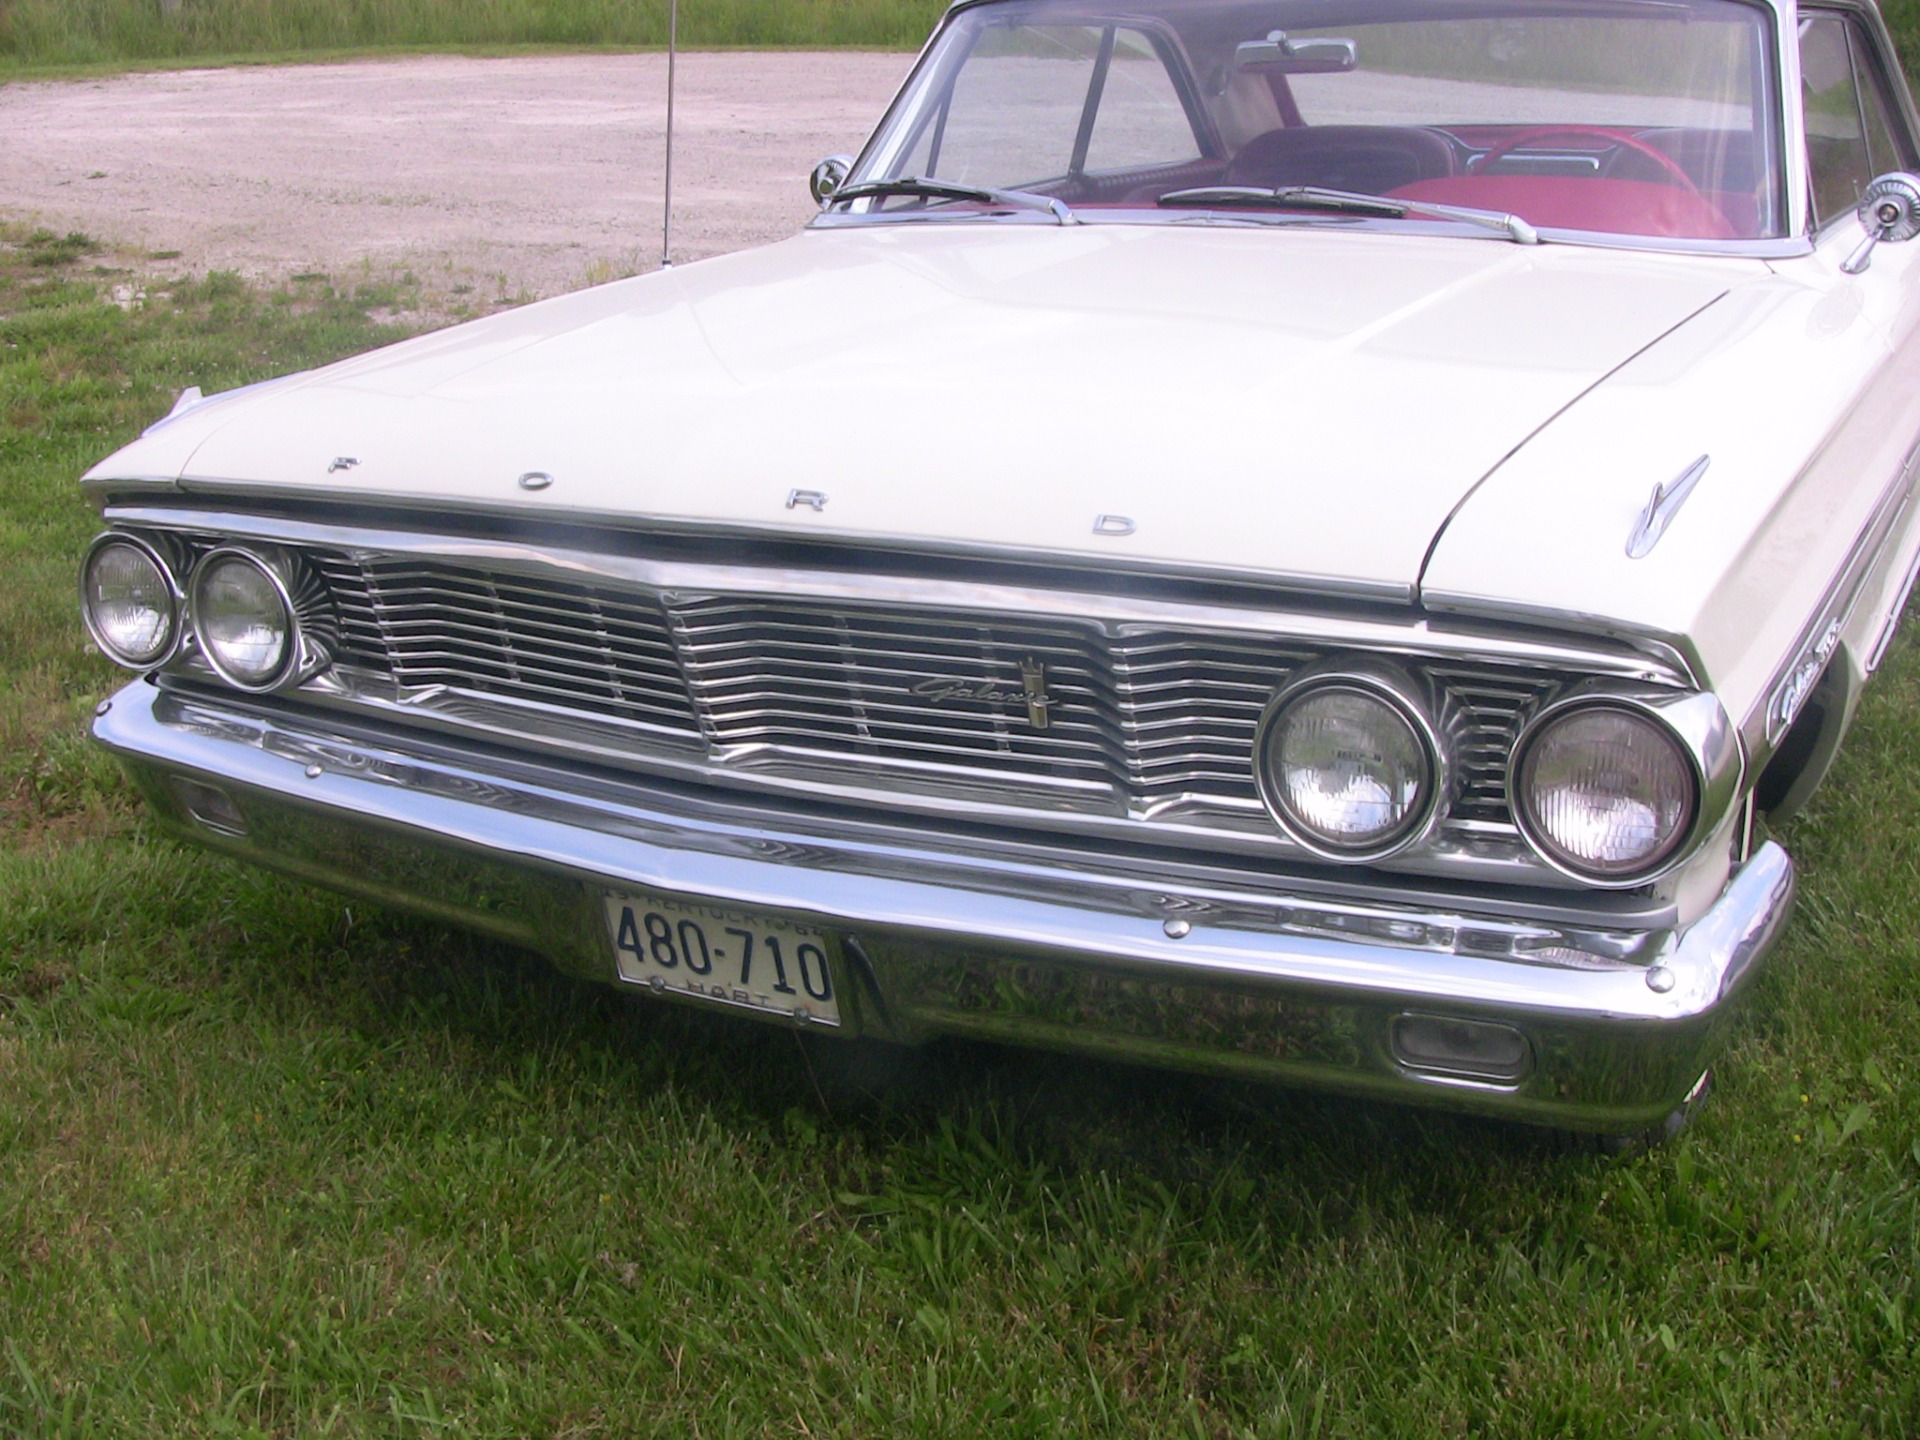 Used 1964 Ford Galaxie